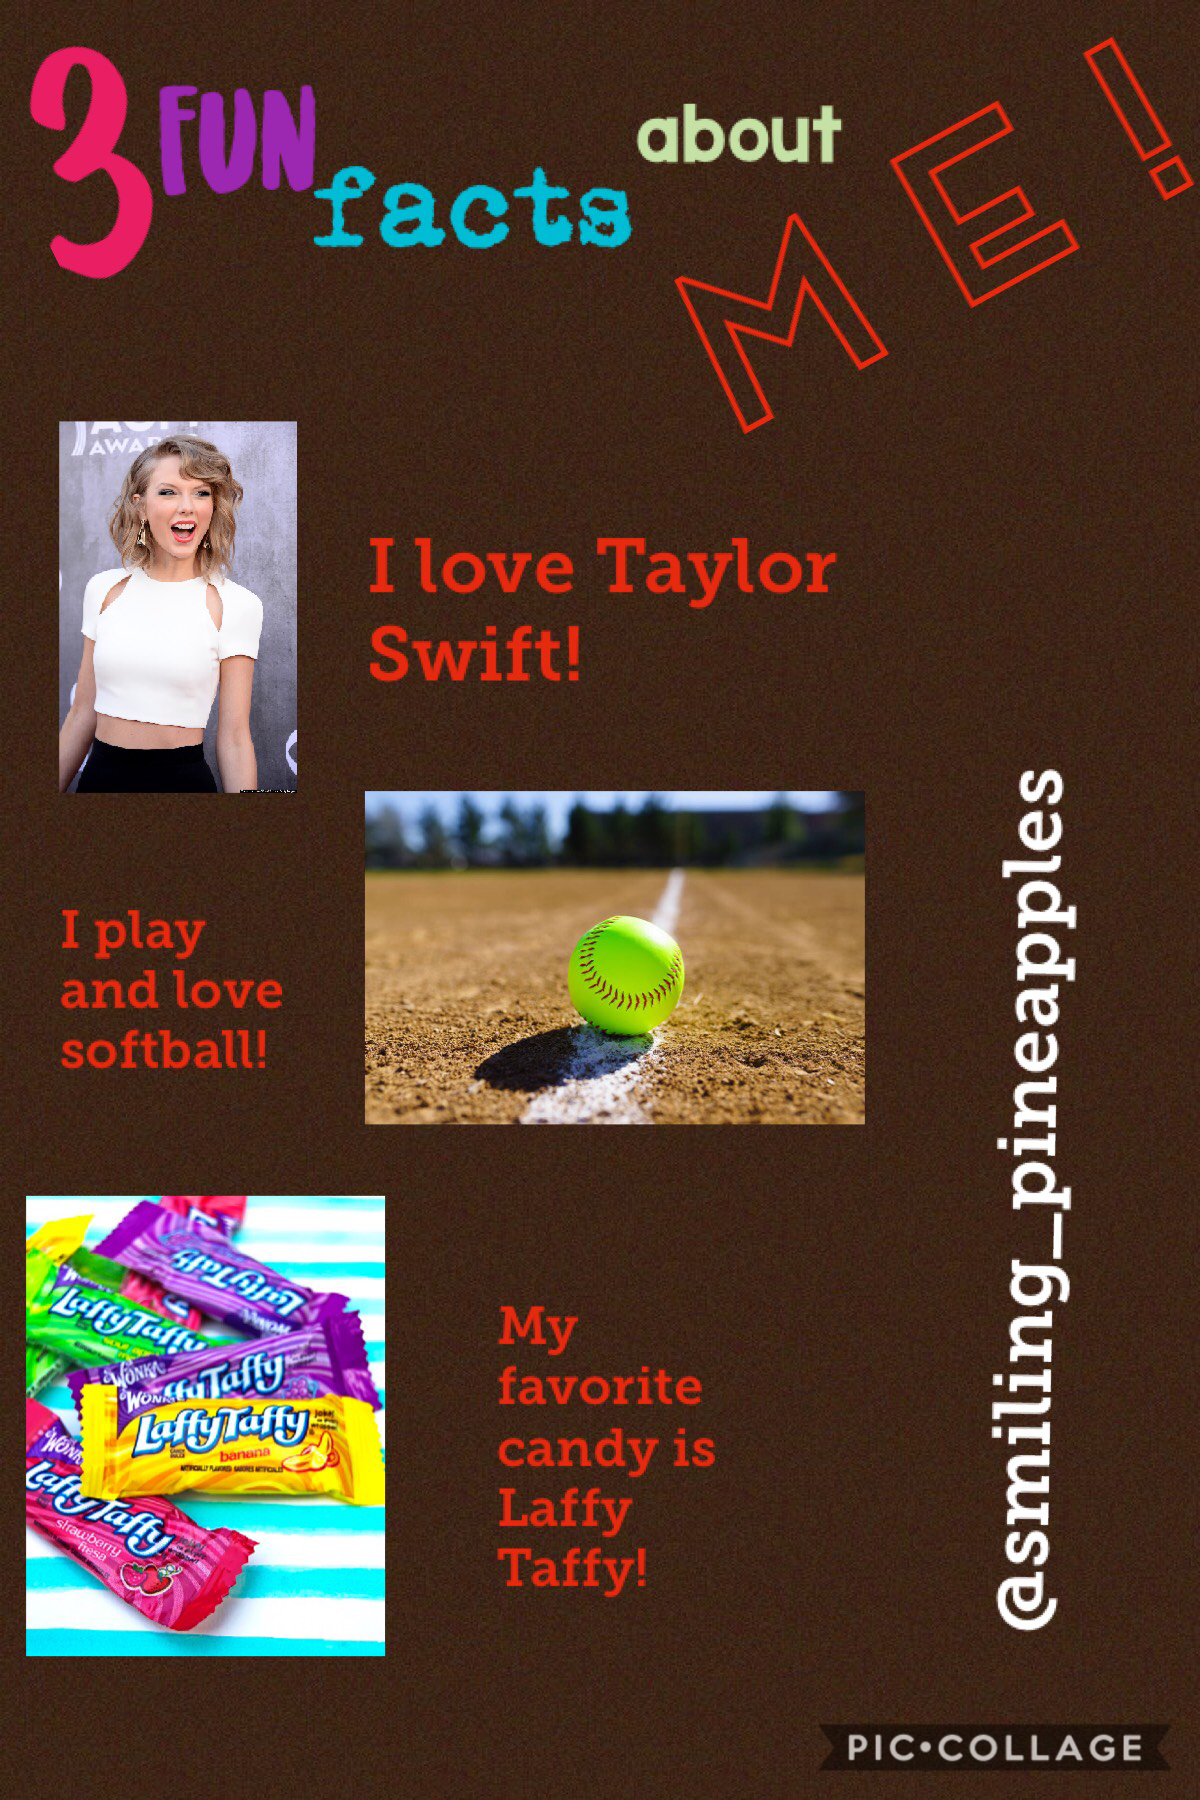 hey! thanks for check out my page! comment if you share any of these facts with me! If you don’t, comment what your favorite candy, your favorite singer, and favorite sport to get a shout out! 

xoxo
smiling_pineapples 🍍🍍